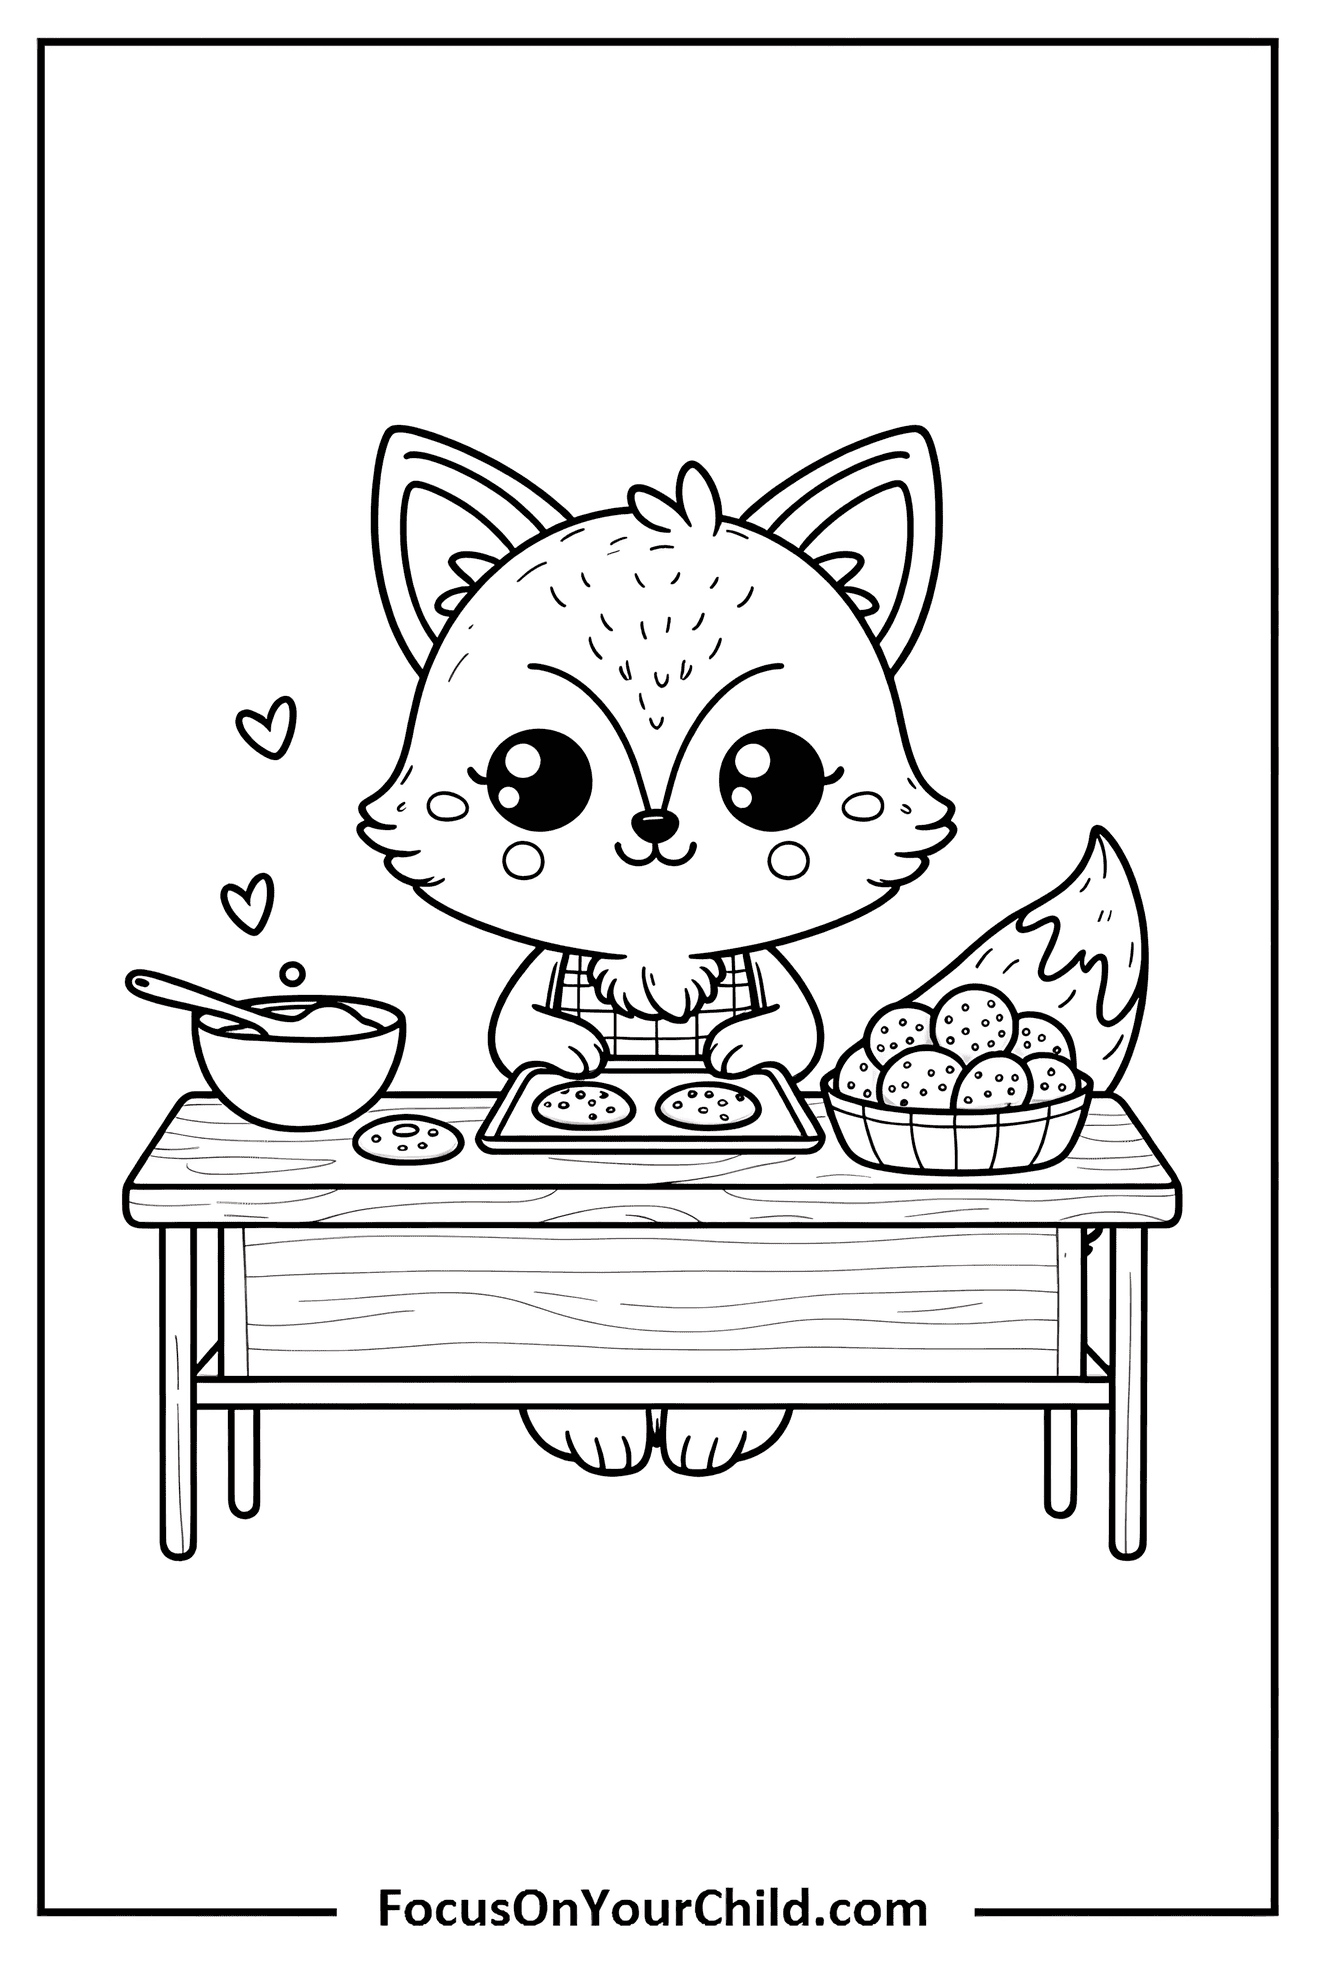 Adorable fox baking cookies in a rustic kitchen.